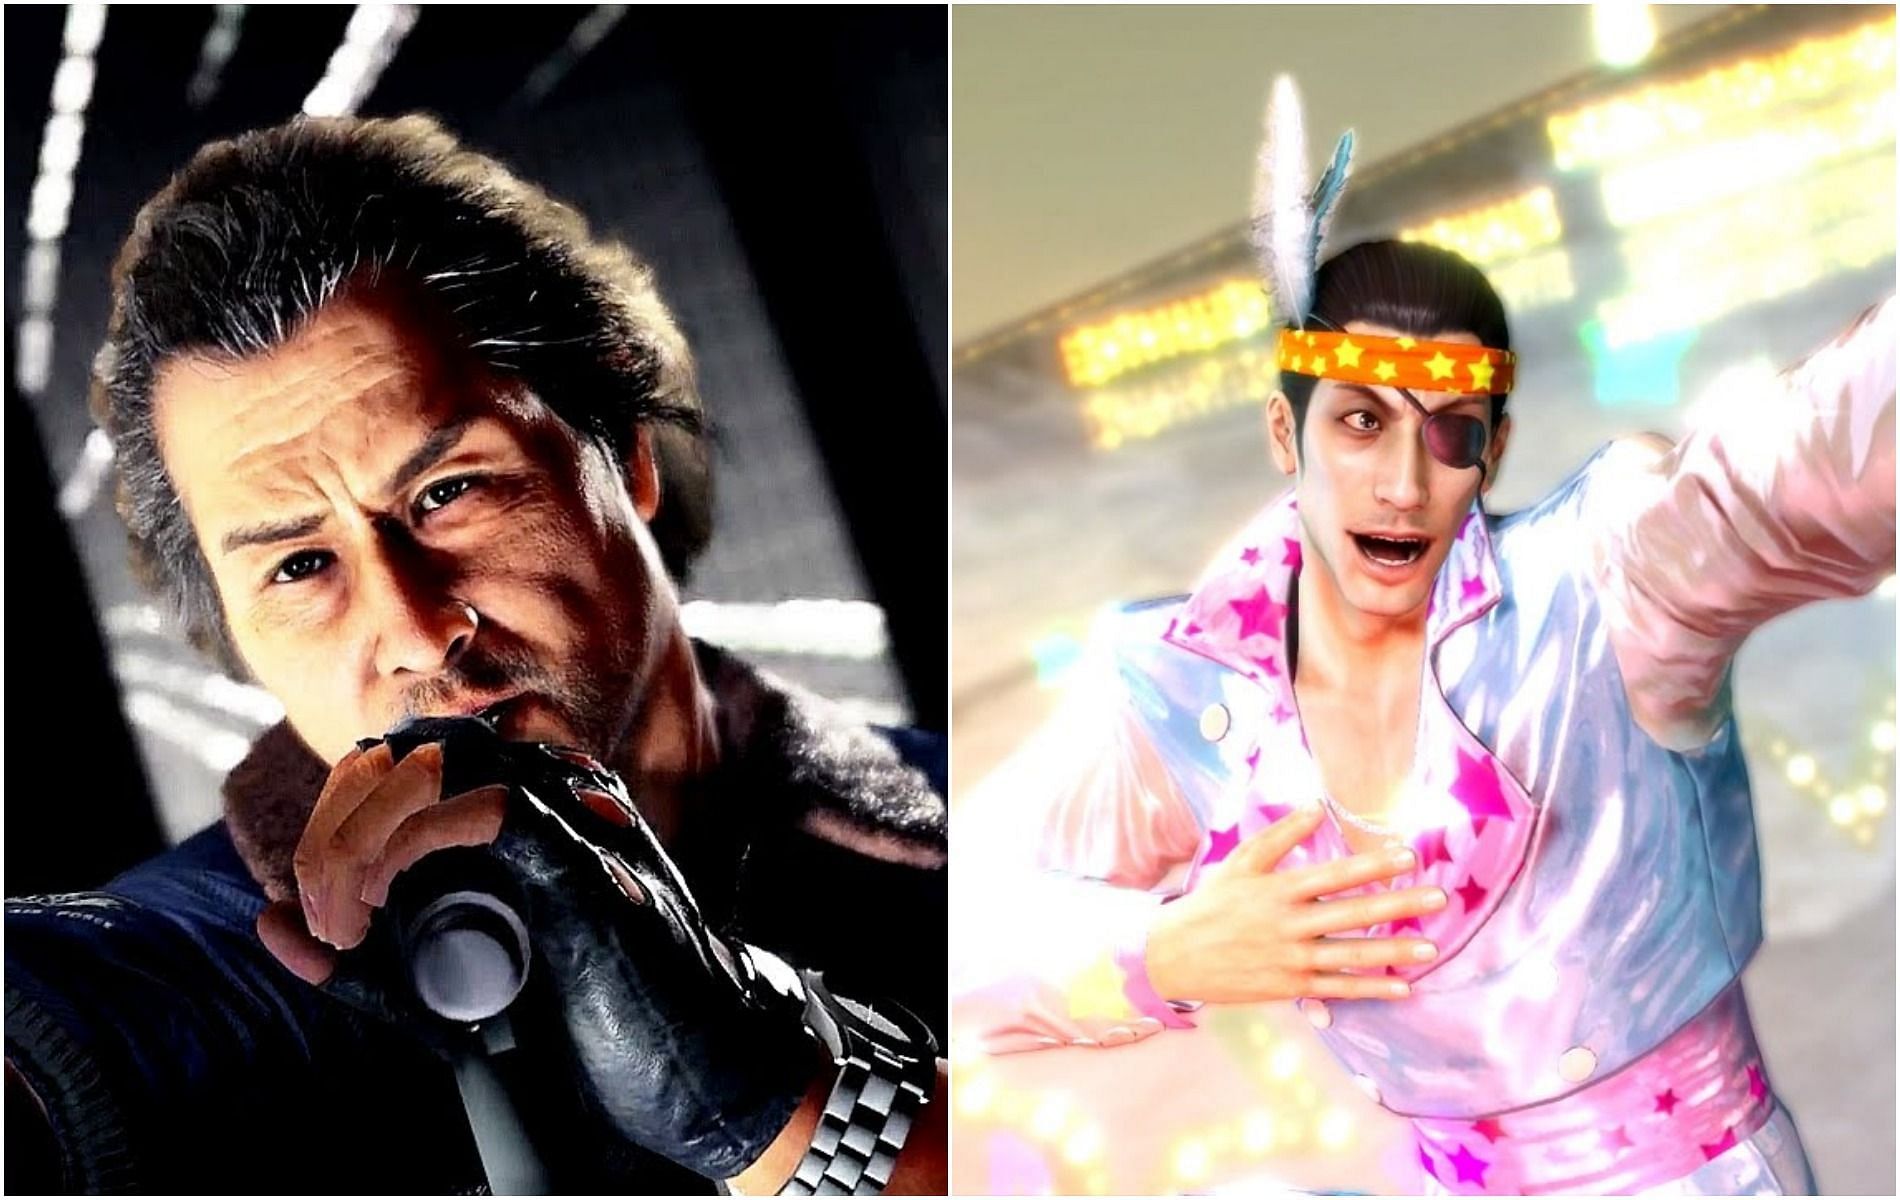 One of the best parts about Yakuza is karaoke, but which songs are the best? (Image via Sportskeeda)